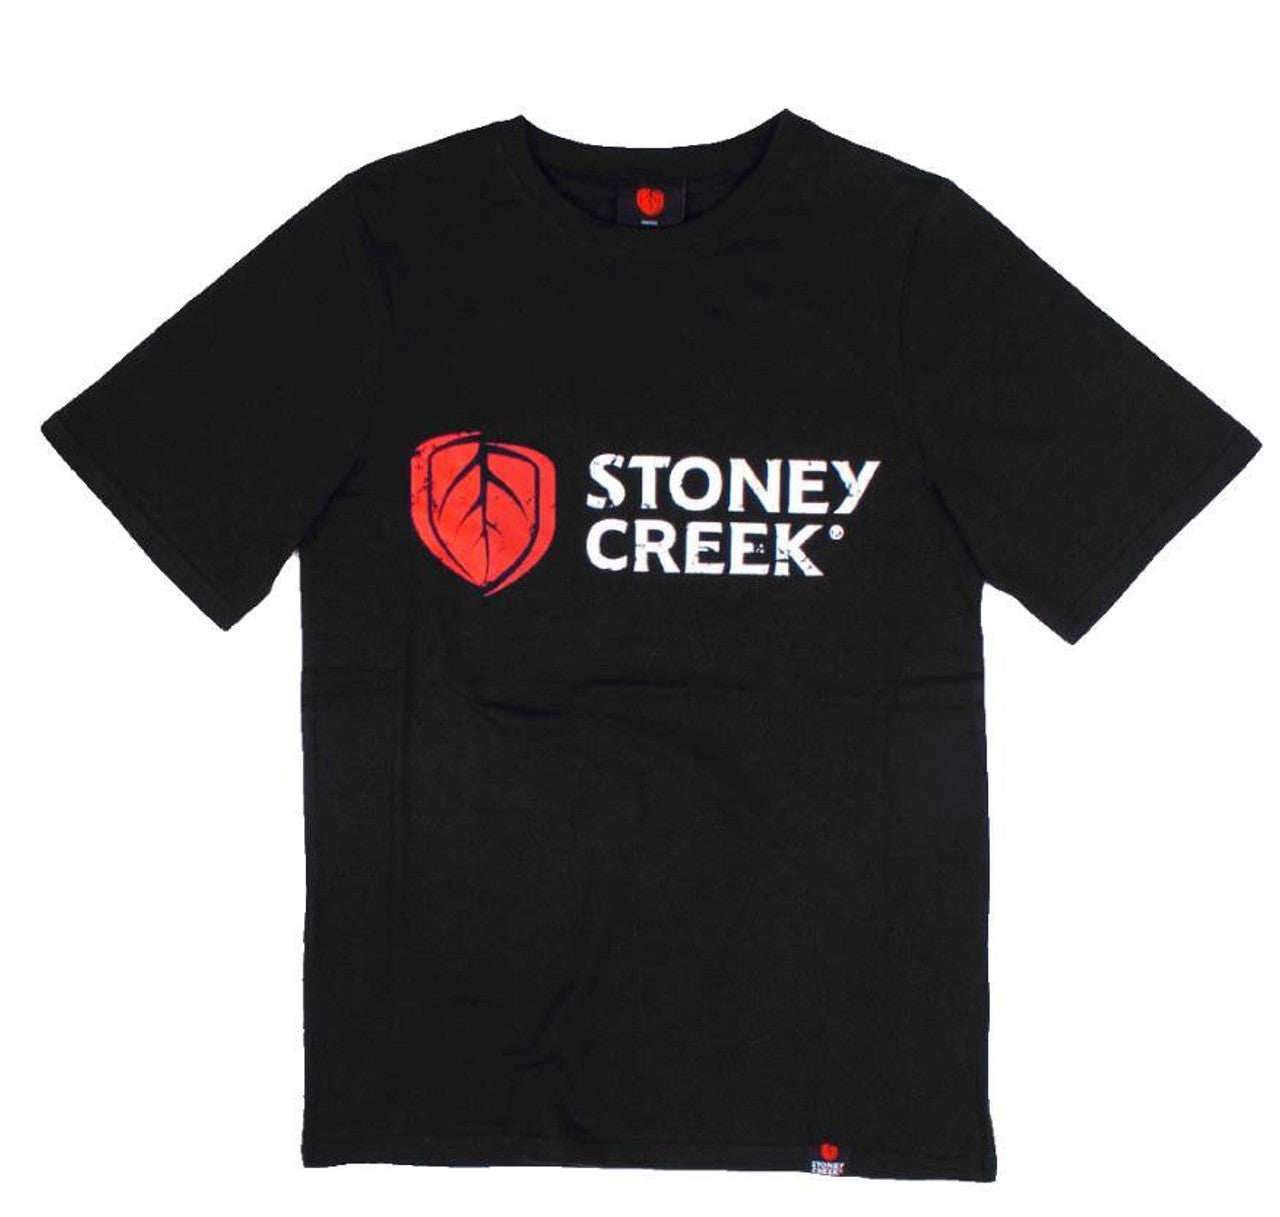 Stoney Creek Its In The Blood Tee - M / BLACK - Mansfield Hunting & Fishing - Products to prepare for Corona Virus